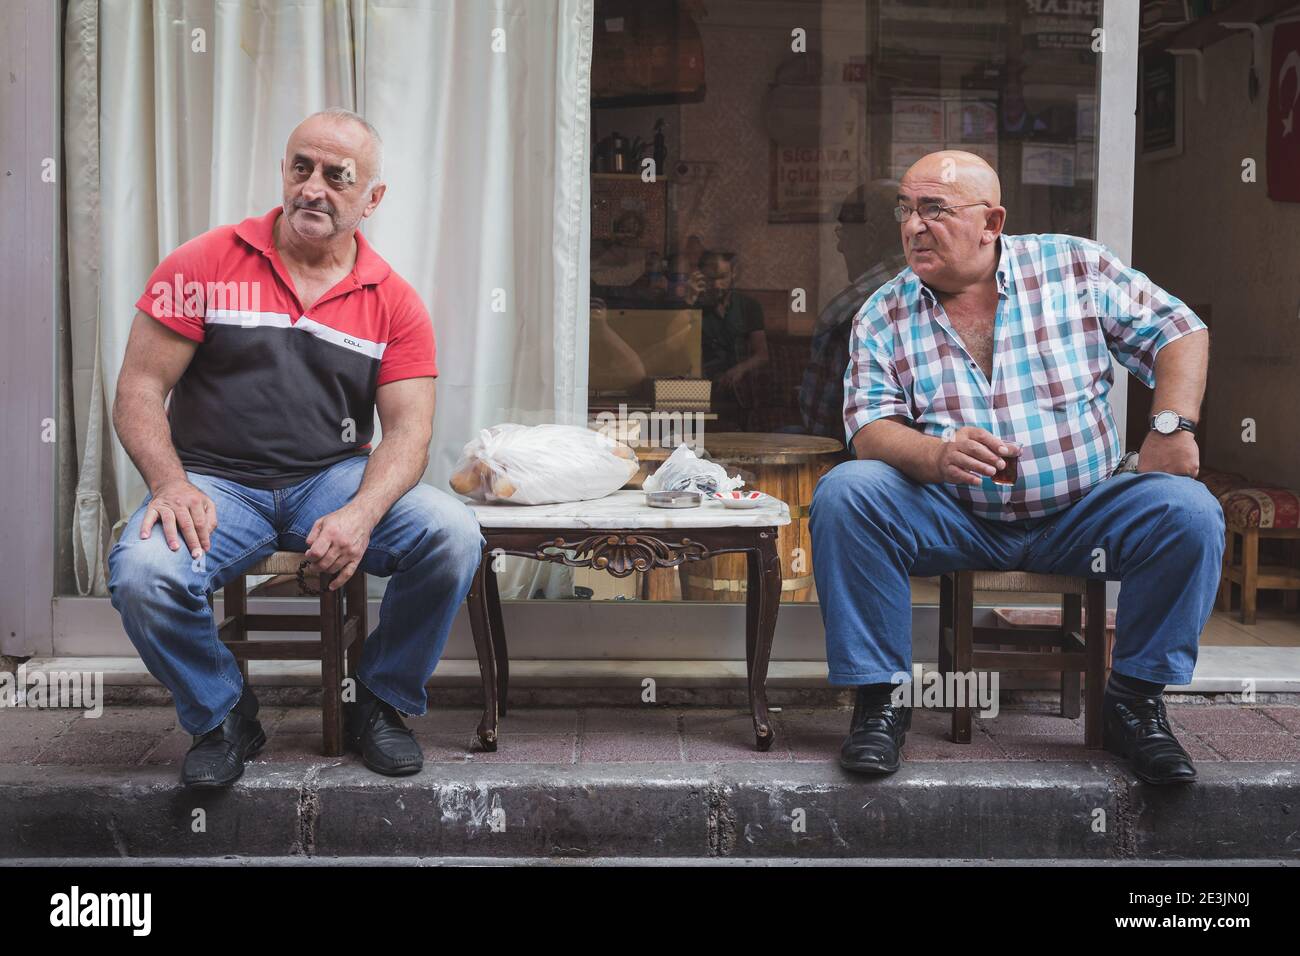 Istanbul, Turkey - September 17 2017: 2 local Turkish men socialising and drinking tea on the streets of the multicultural and authentic Istanbul neig Stock Photo